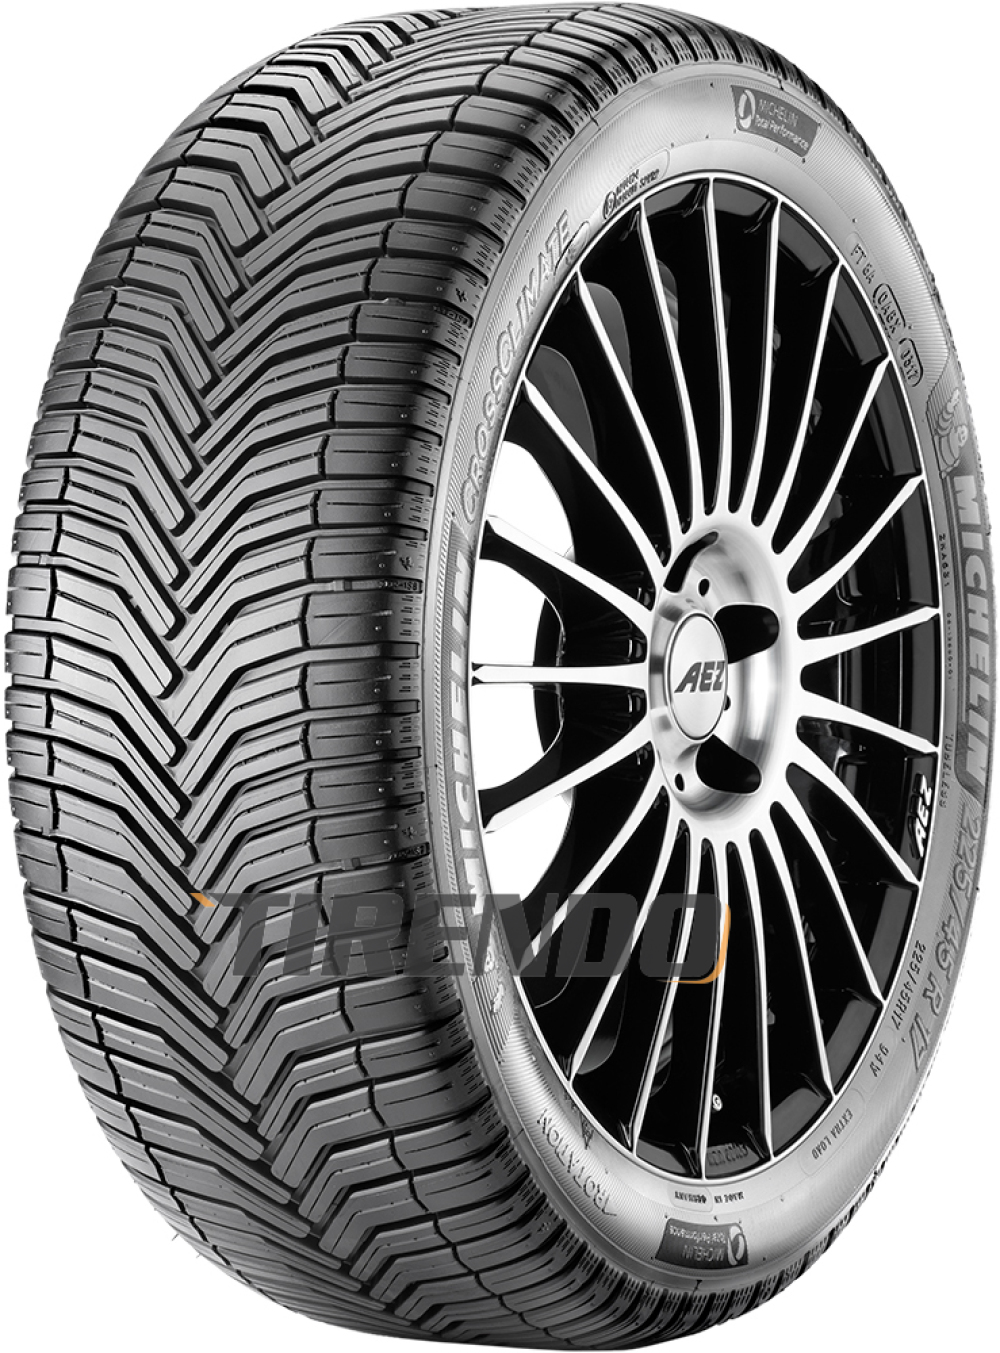 Image of Michelin CrossClimate ( 195/55 R16 91H XL )